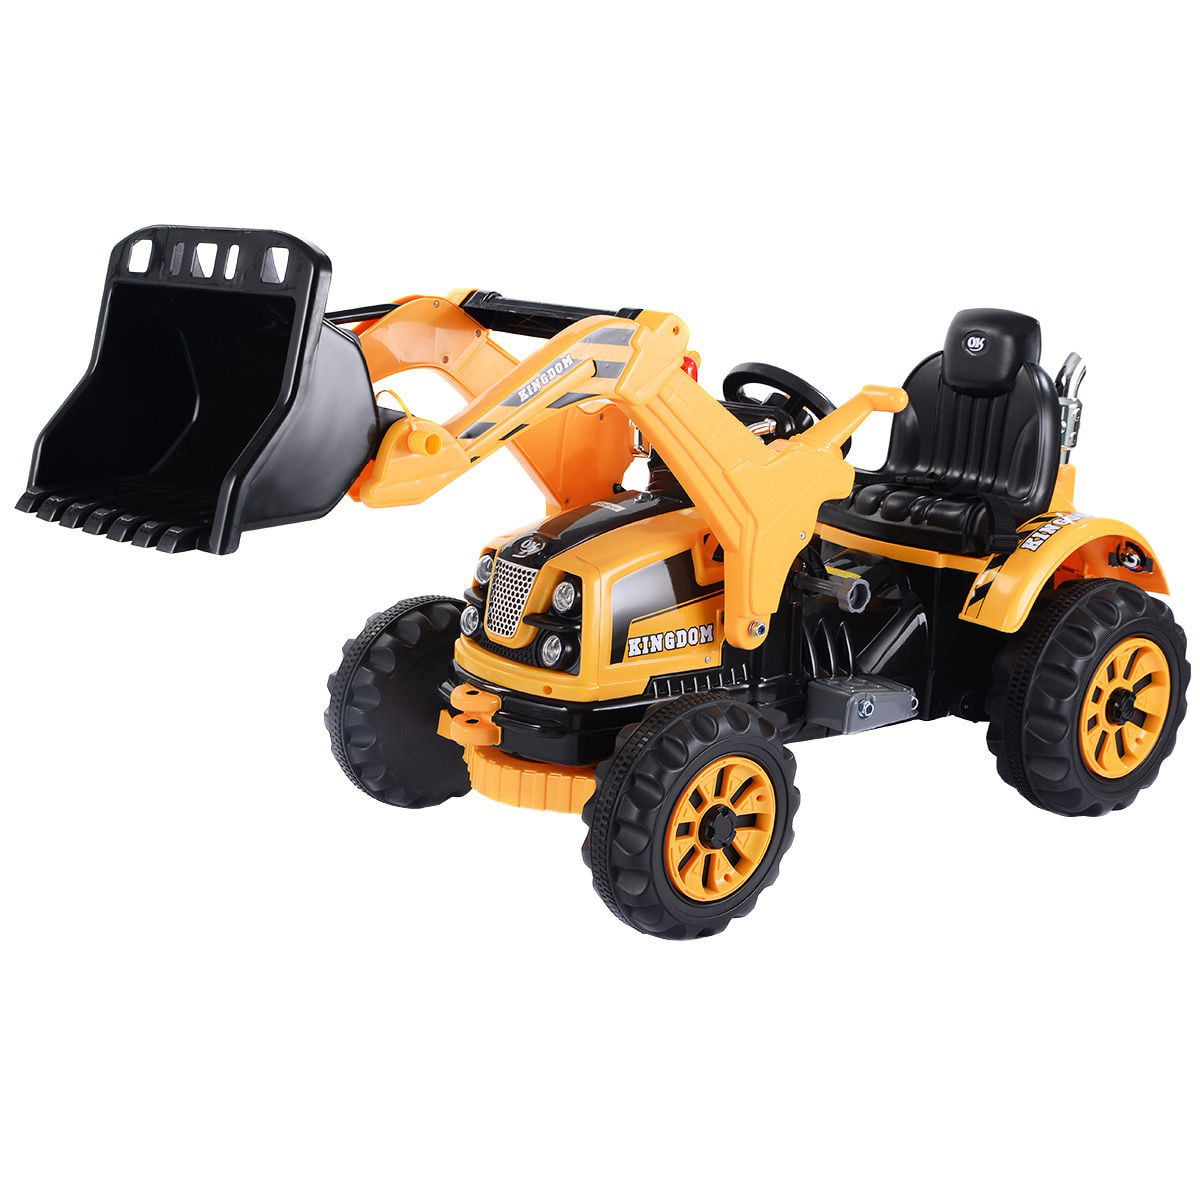 12V Battery Powered Kids Ride On Excavator Truck With Front Loader Digger Yellow 